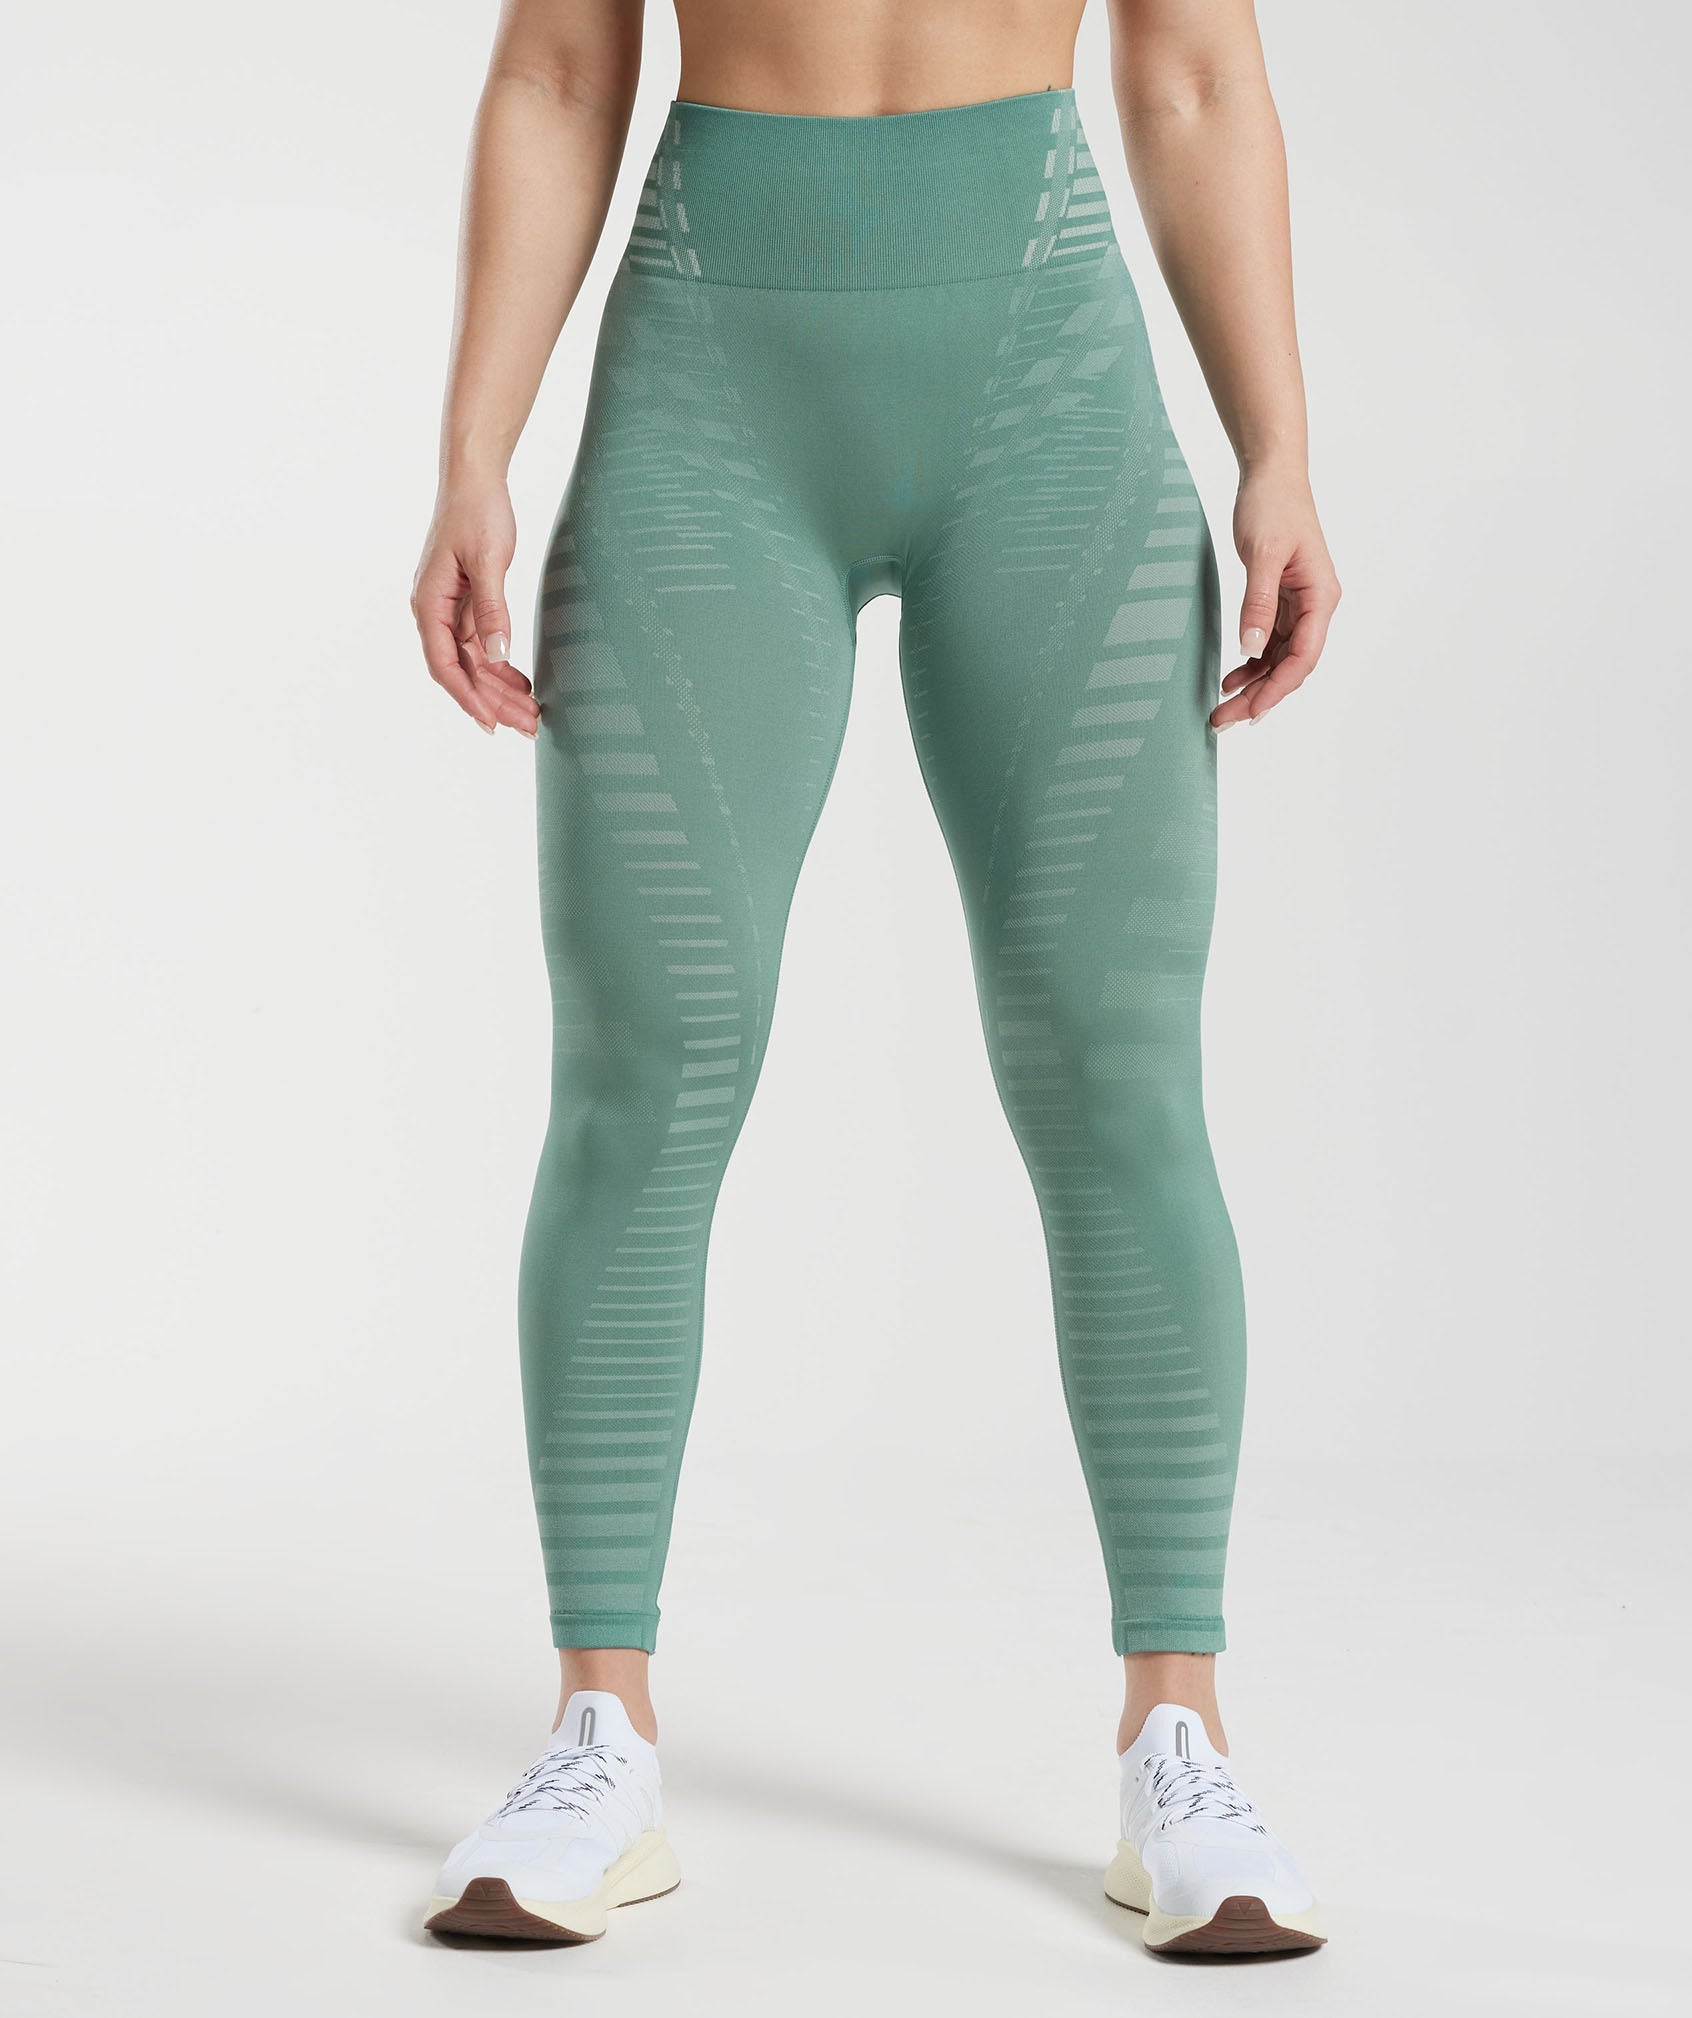 Apex Limit Leggings in Ink Teal/Frost Teal - view 1